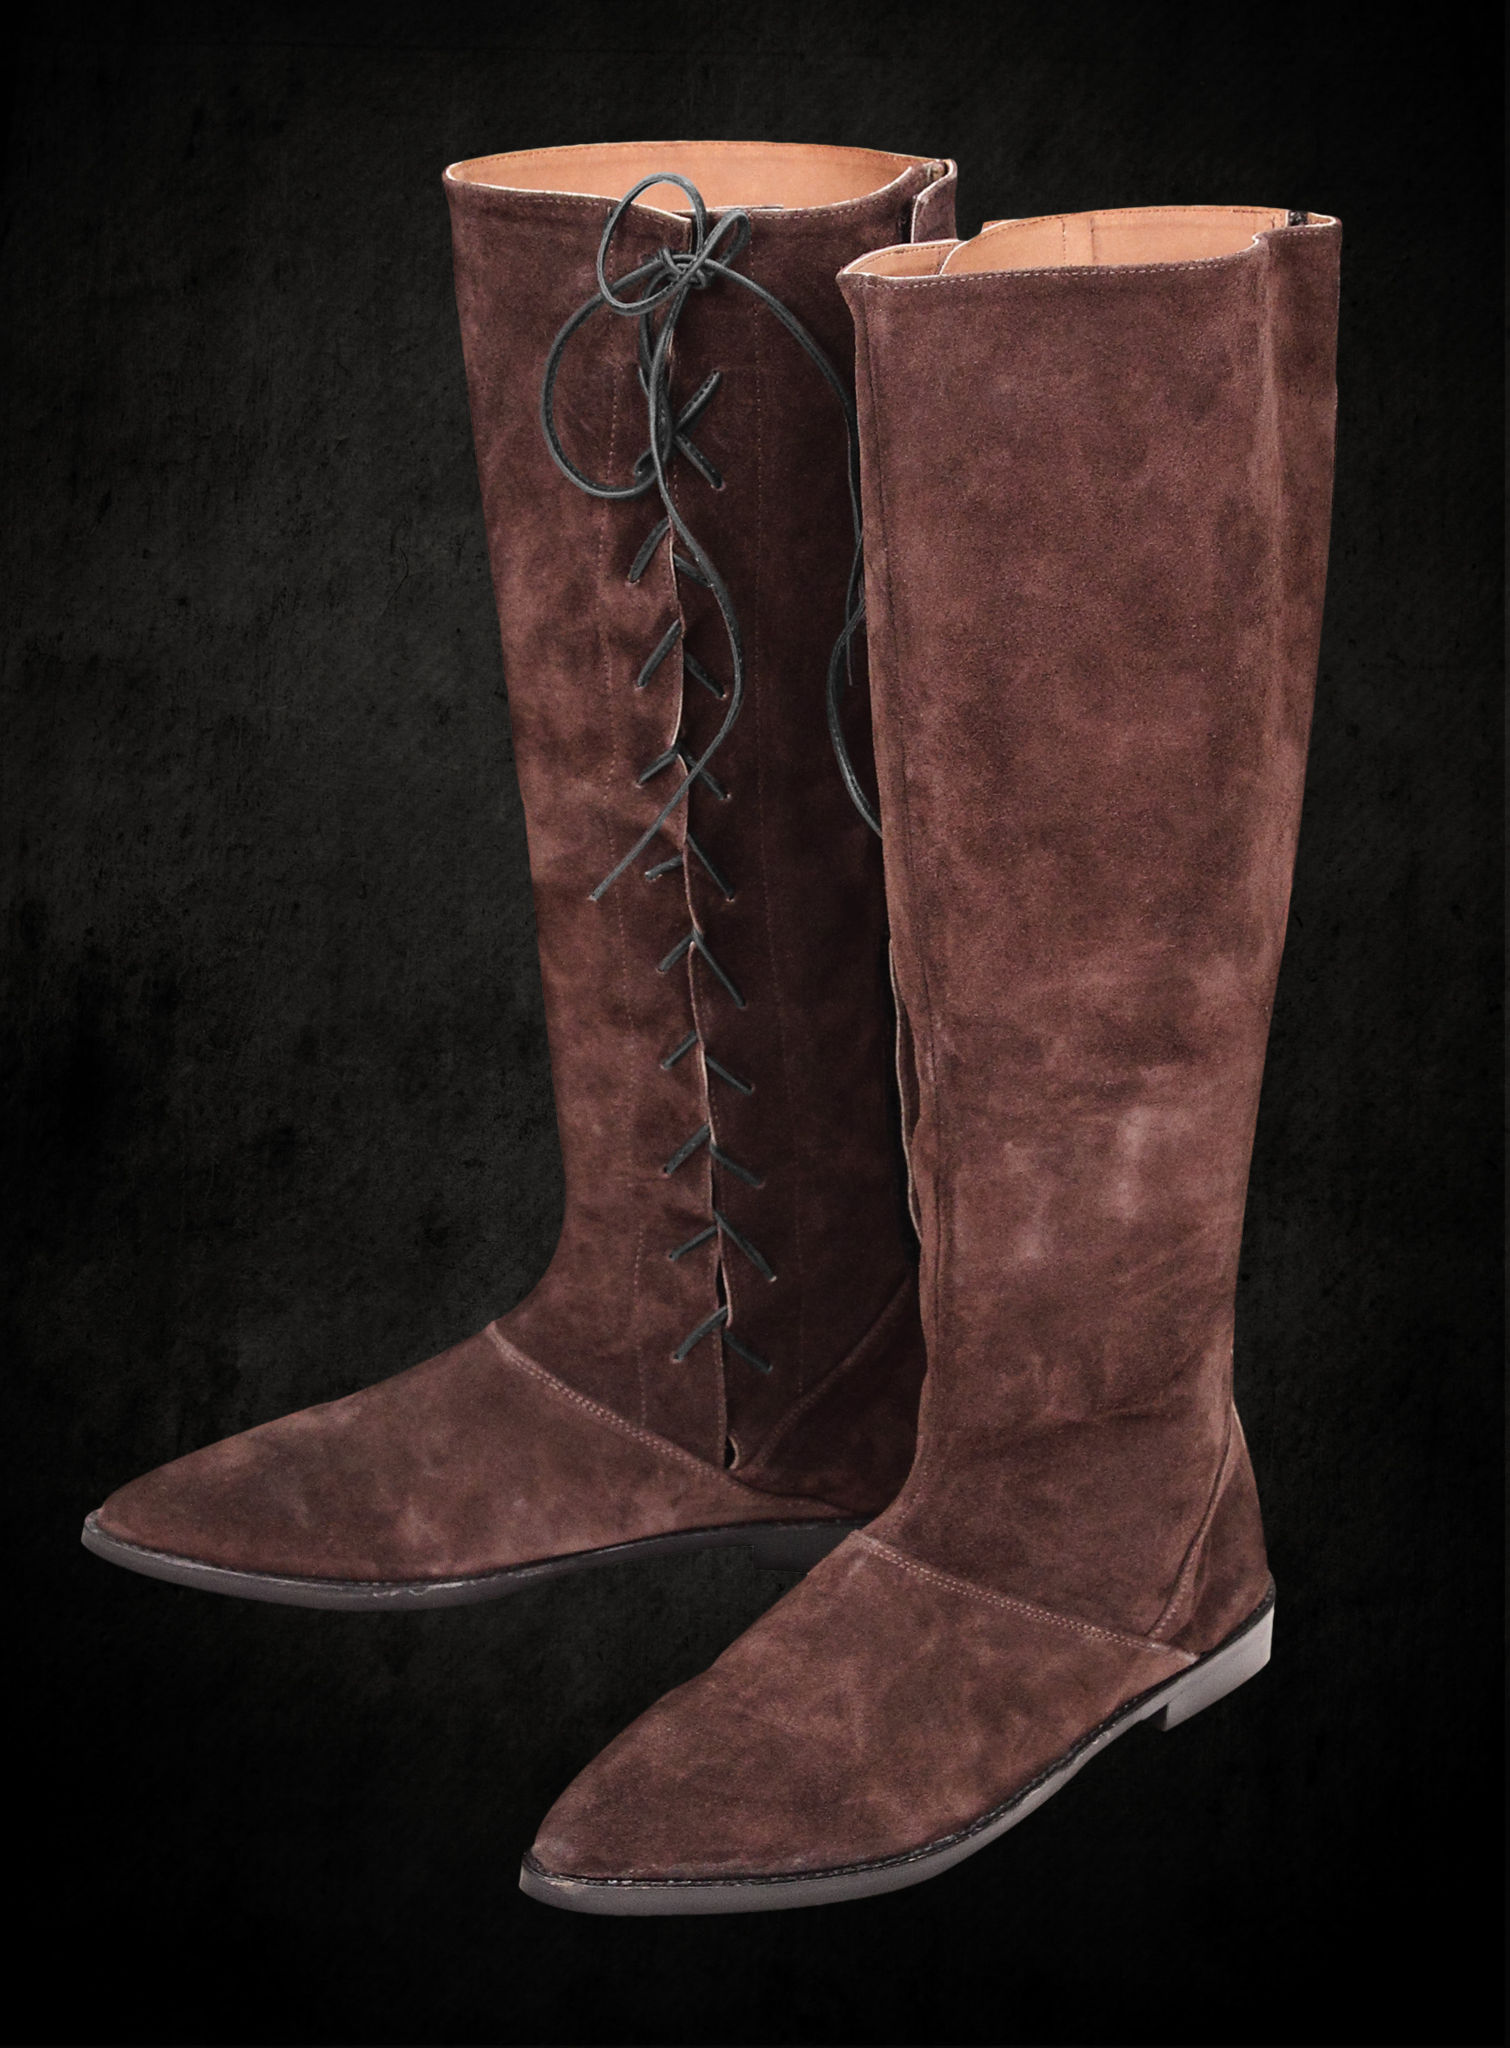 Robin Hood Maid Marion Boots - Official replica from Ridley Scott's ...